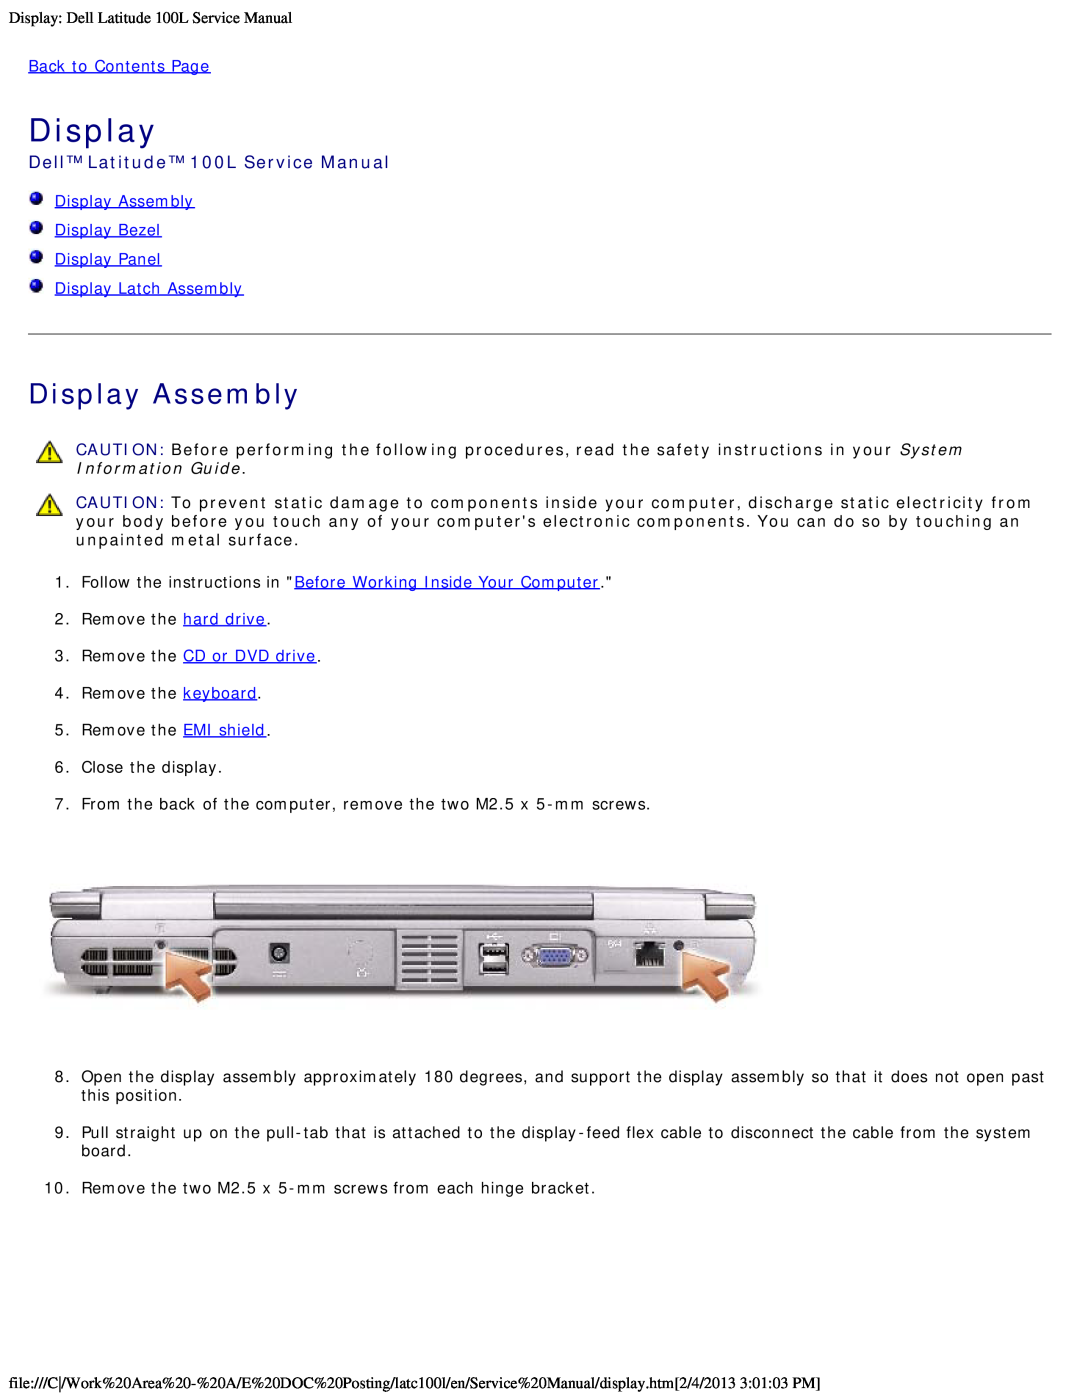 Dell 100L Display Assembly Display Bezel Display Panel Display Latch Assembly, Remove the CD or DVD drive 